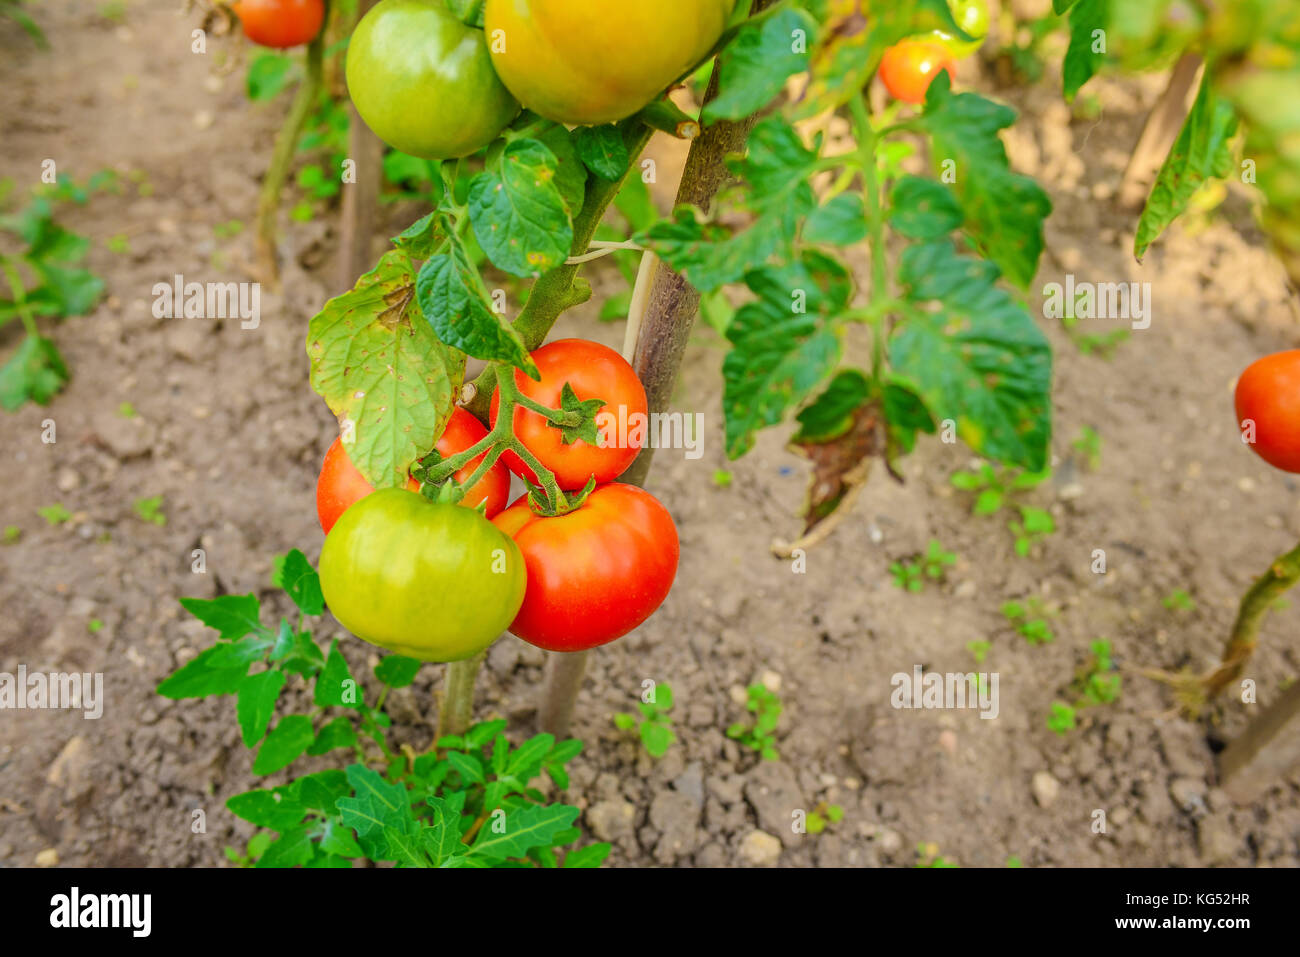 Ripe Tomatoes Growing on the Branches, Cultivated in the Garden, Gardening, Agriculture and Culinary Concept, Food Background, Growth Tomato, Red Toma Stock Photo